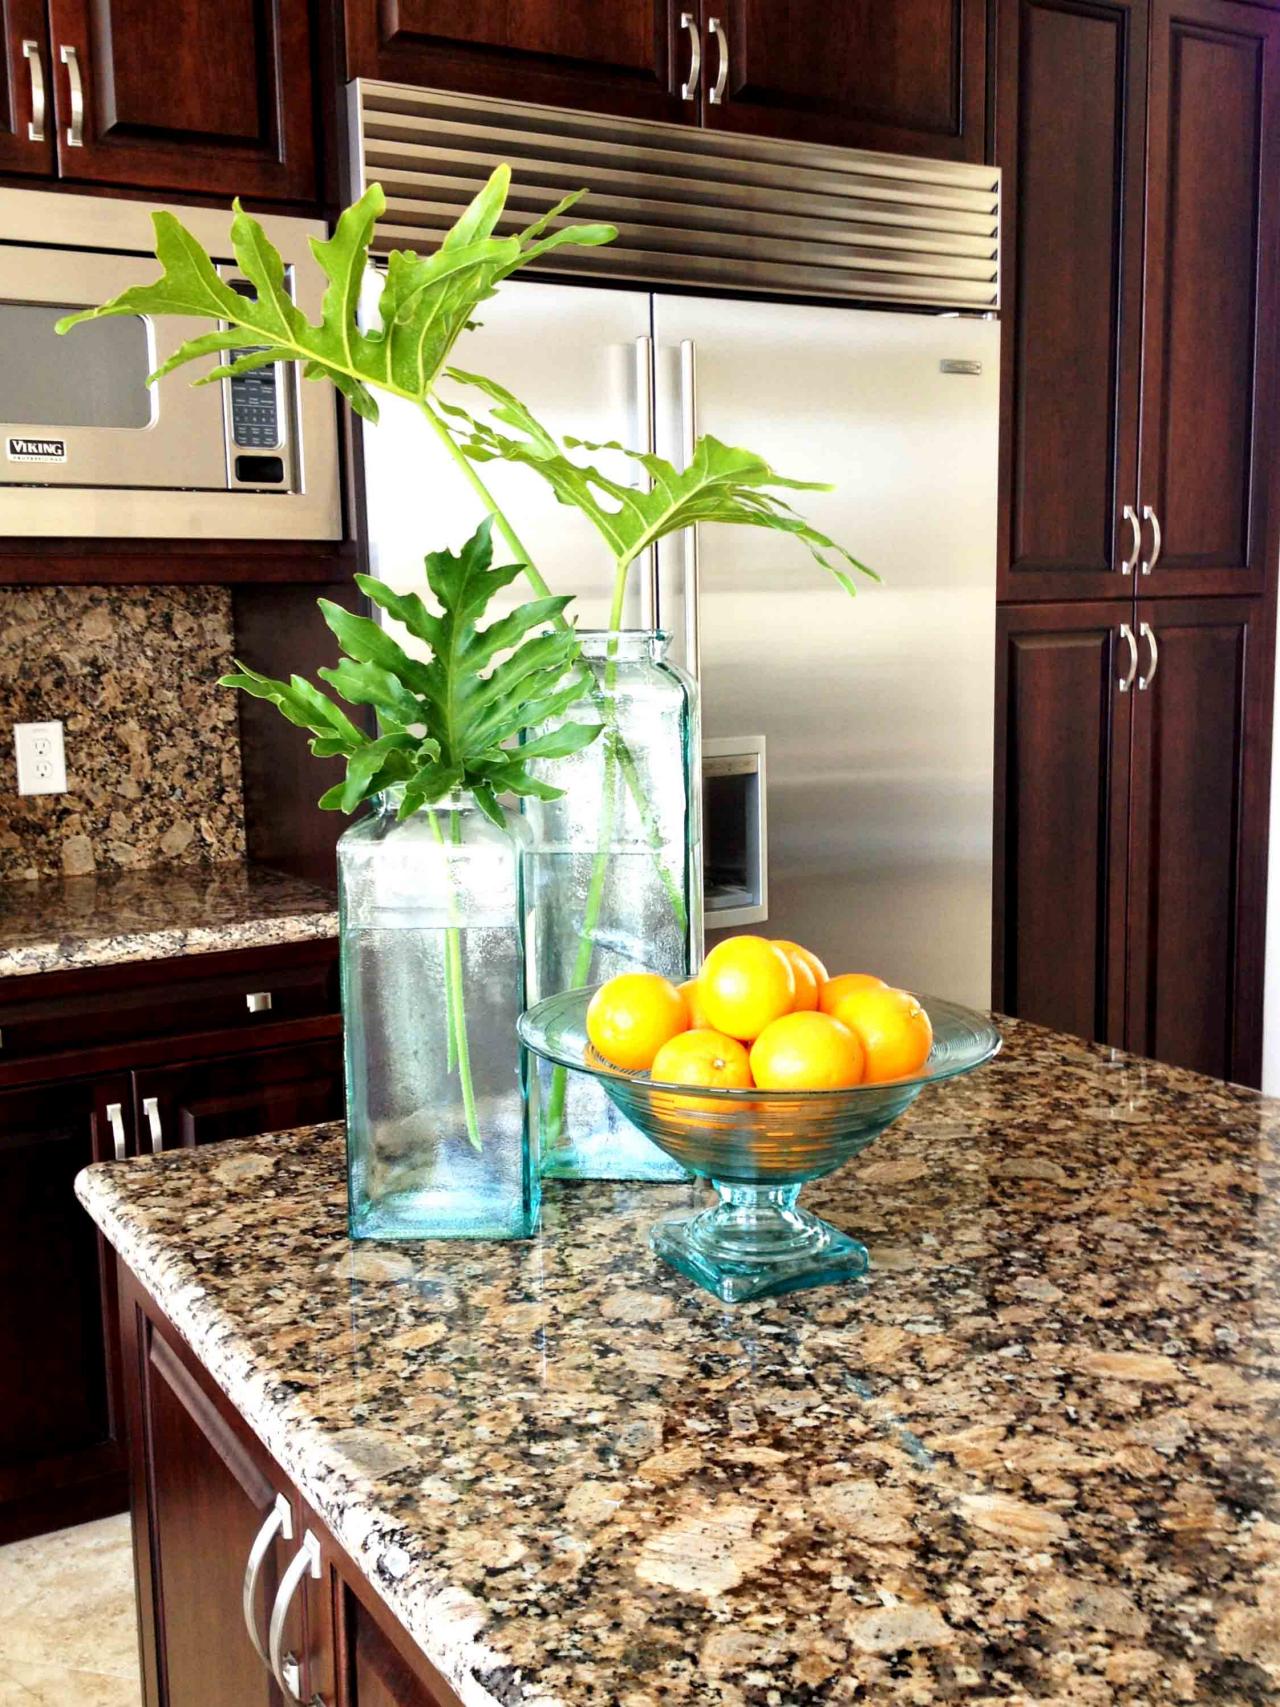 types of kitchen countertops